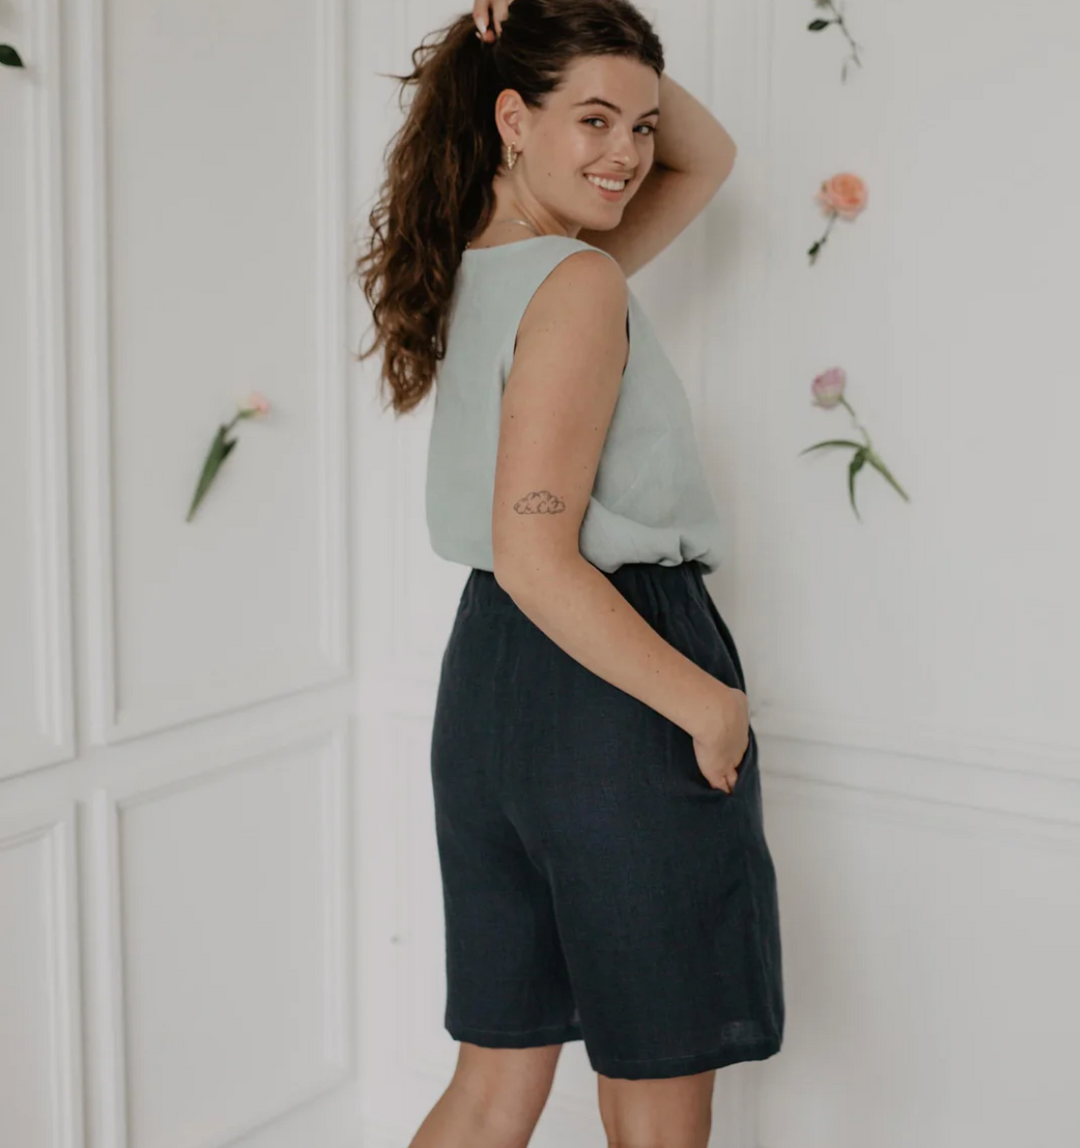 Get Summer-Ready with 10% Cashback on Ethical Women's Shorts